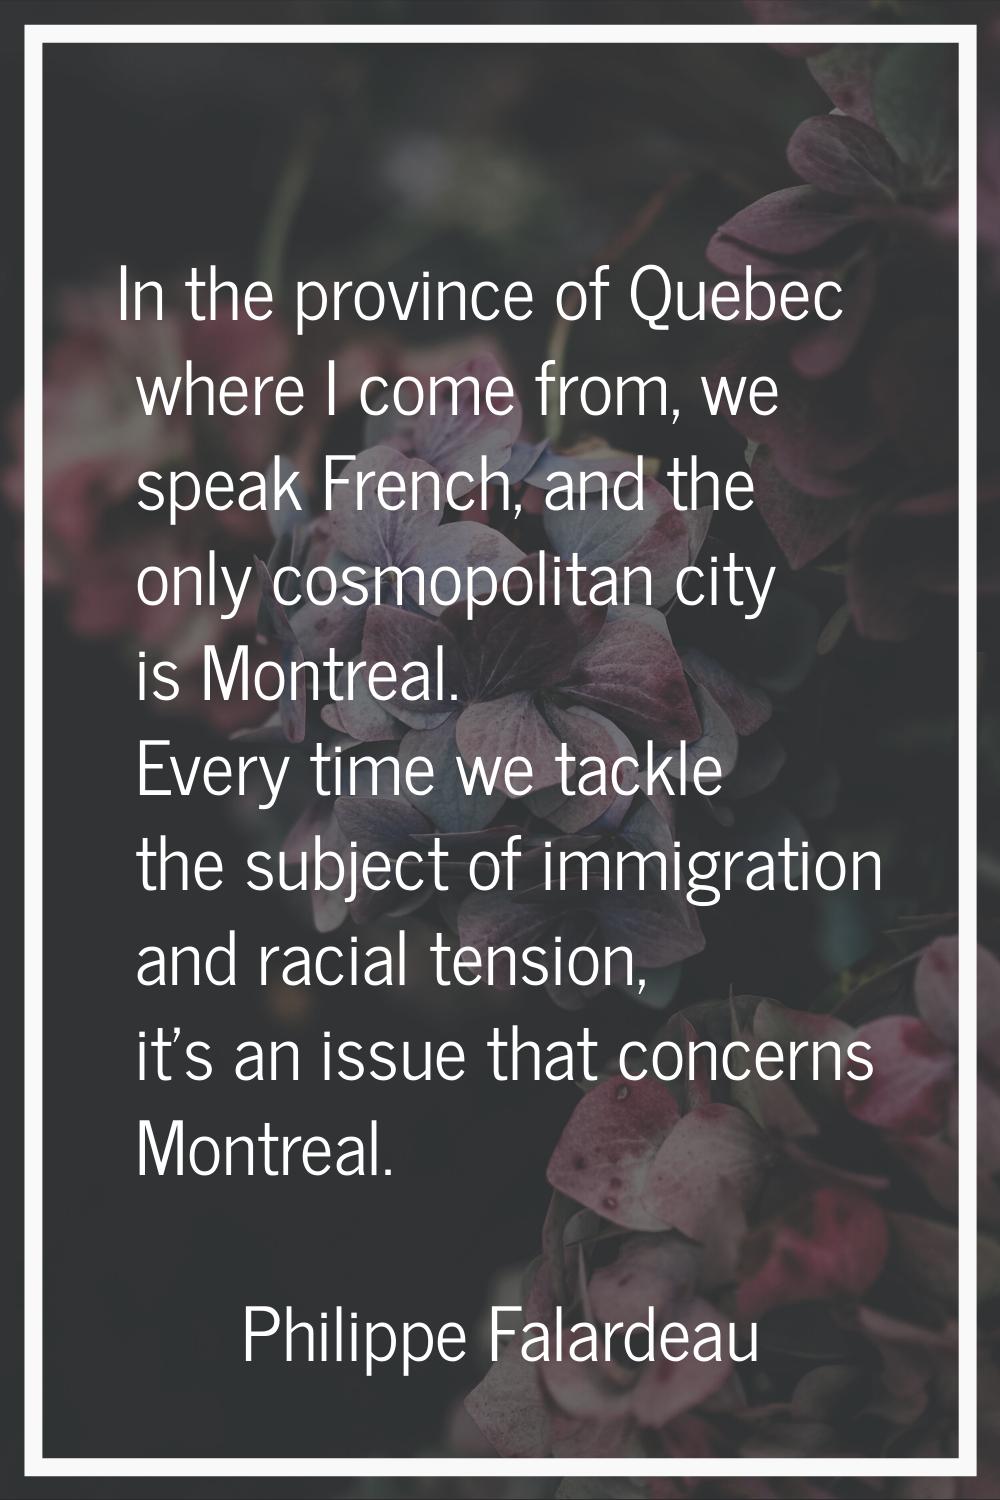 In the province of Quebec where I come from, we speak French, and the only cosmopolitan city is Mon